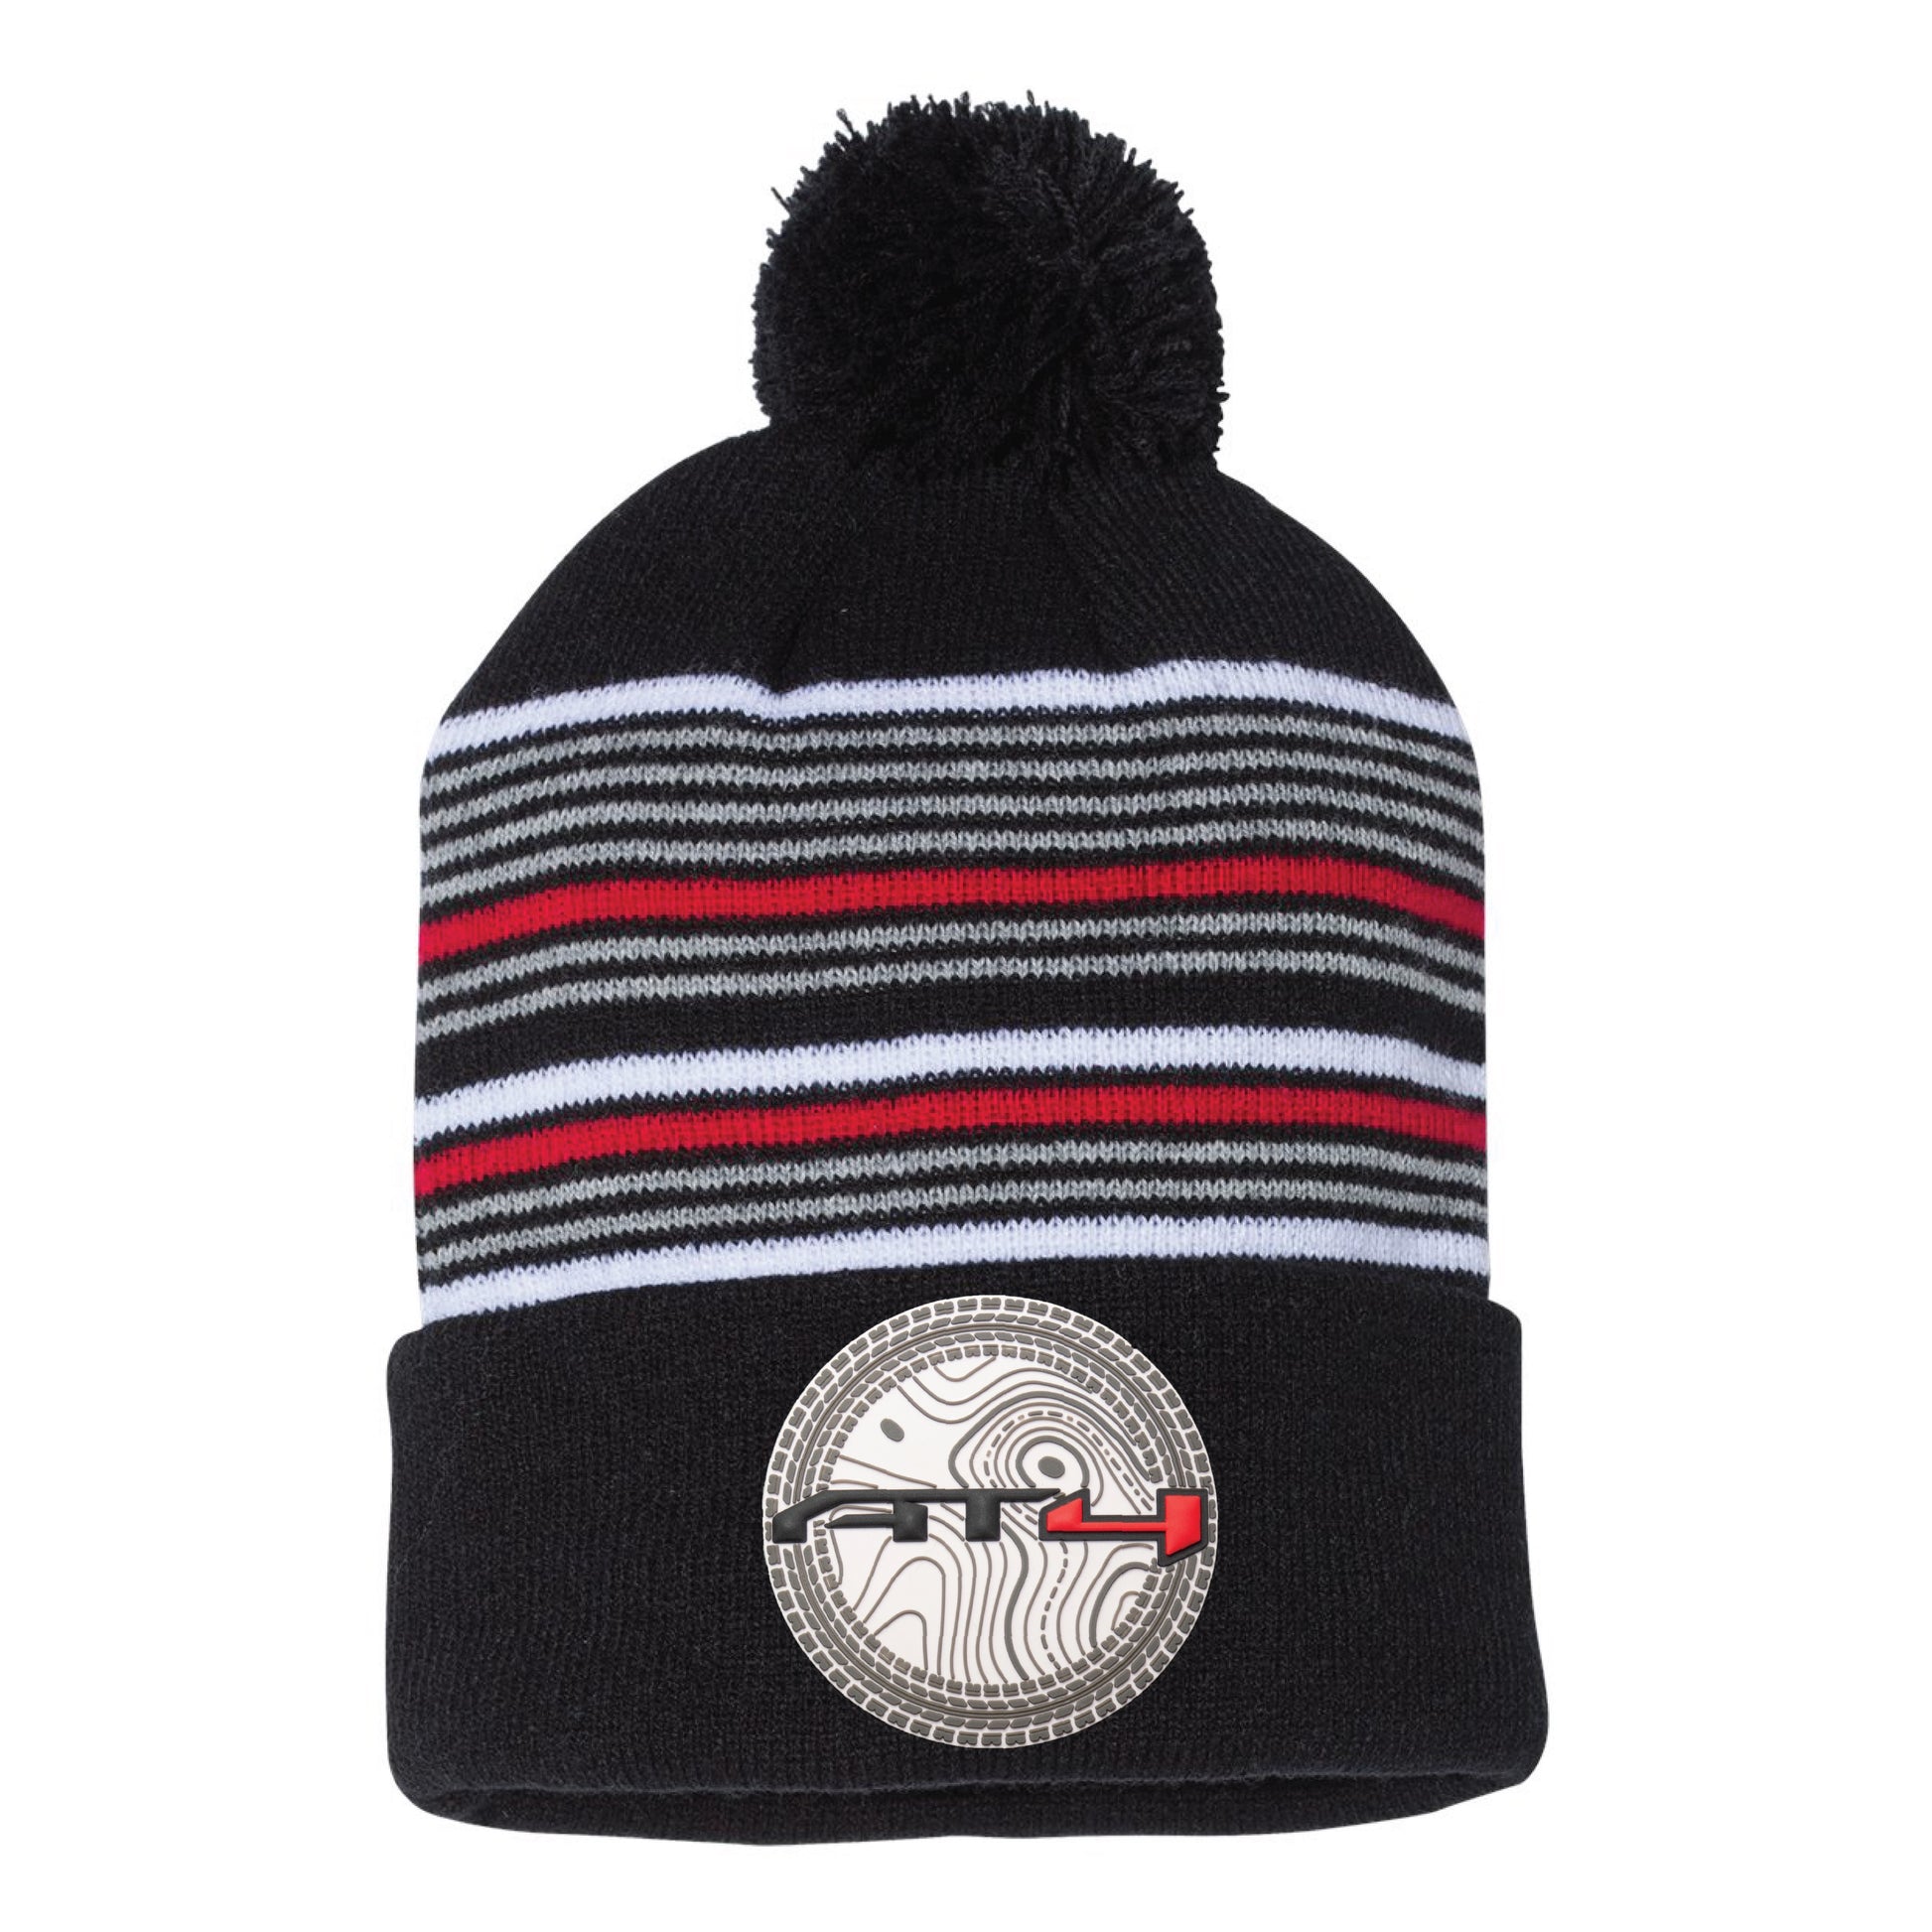 AT4 12 in Striped Knit Pom-Pom Top Beanie- Black/ White/ Grey/ Red - Ten Gallon Hat Co.